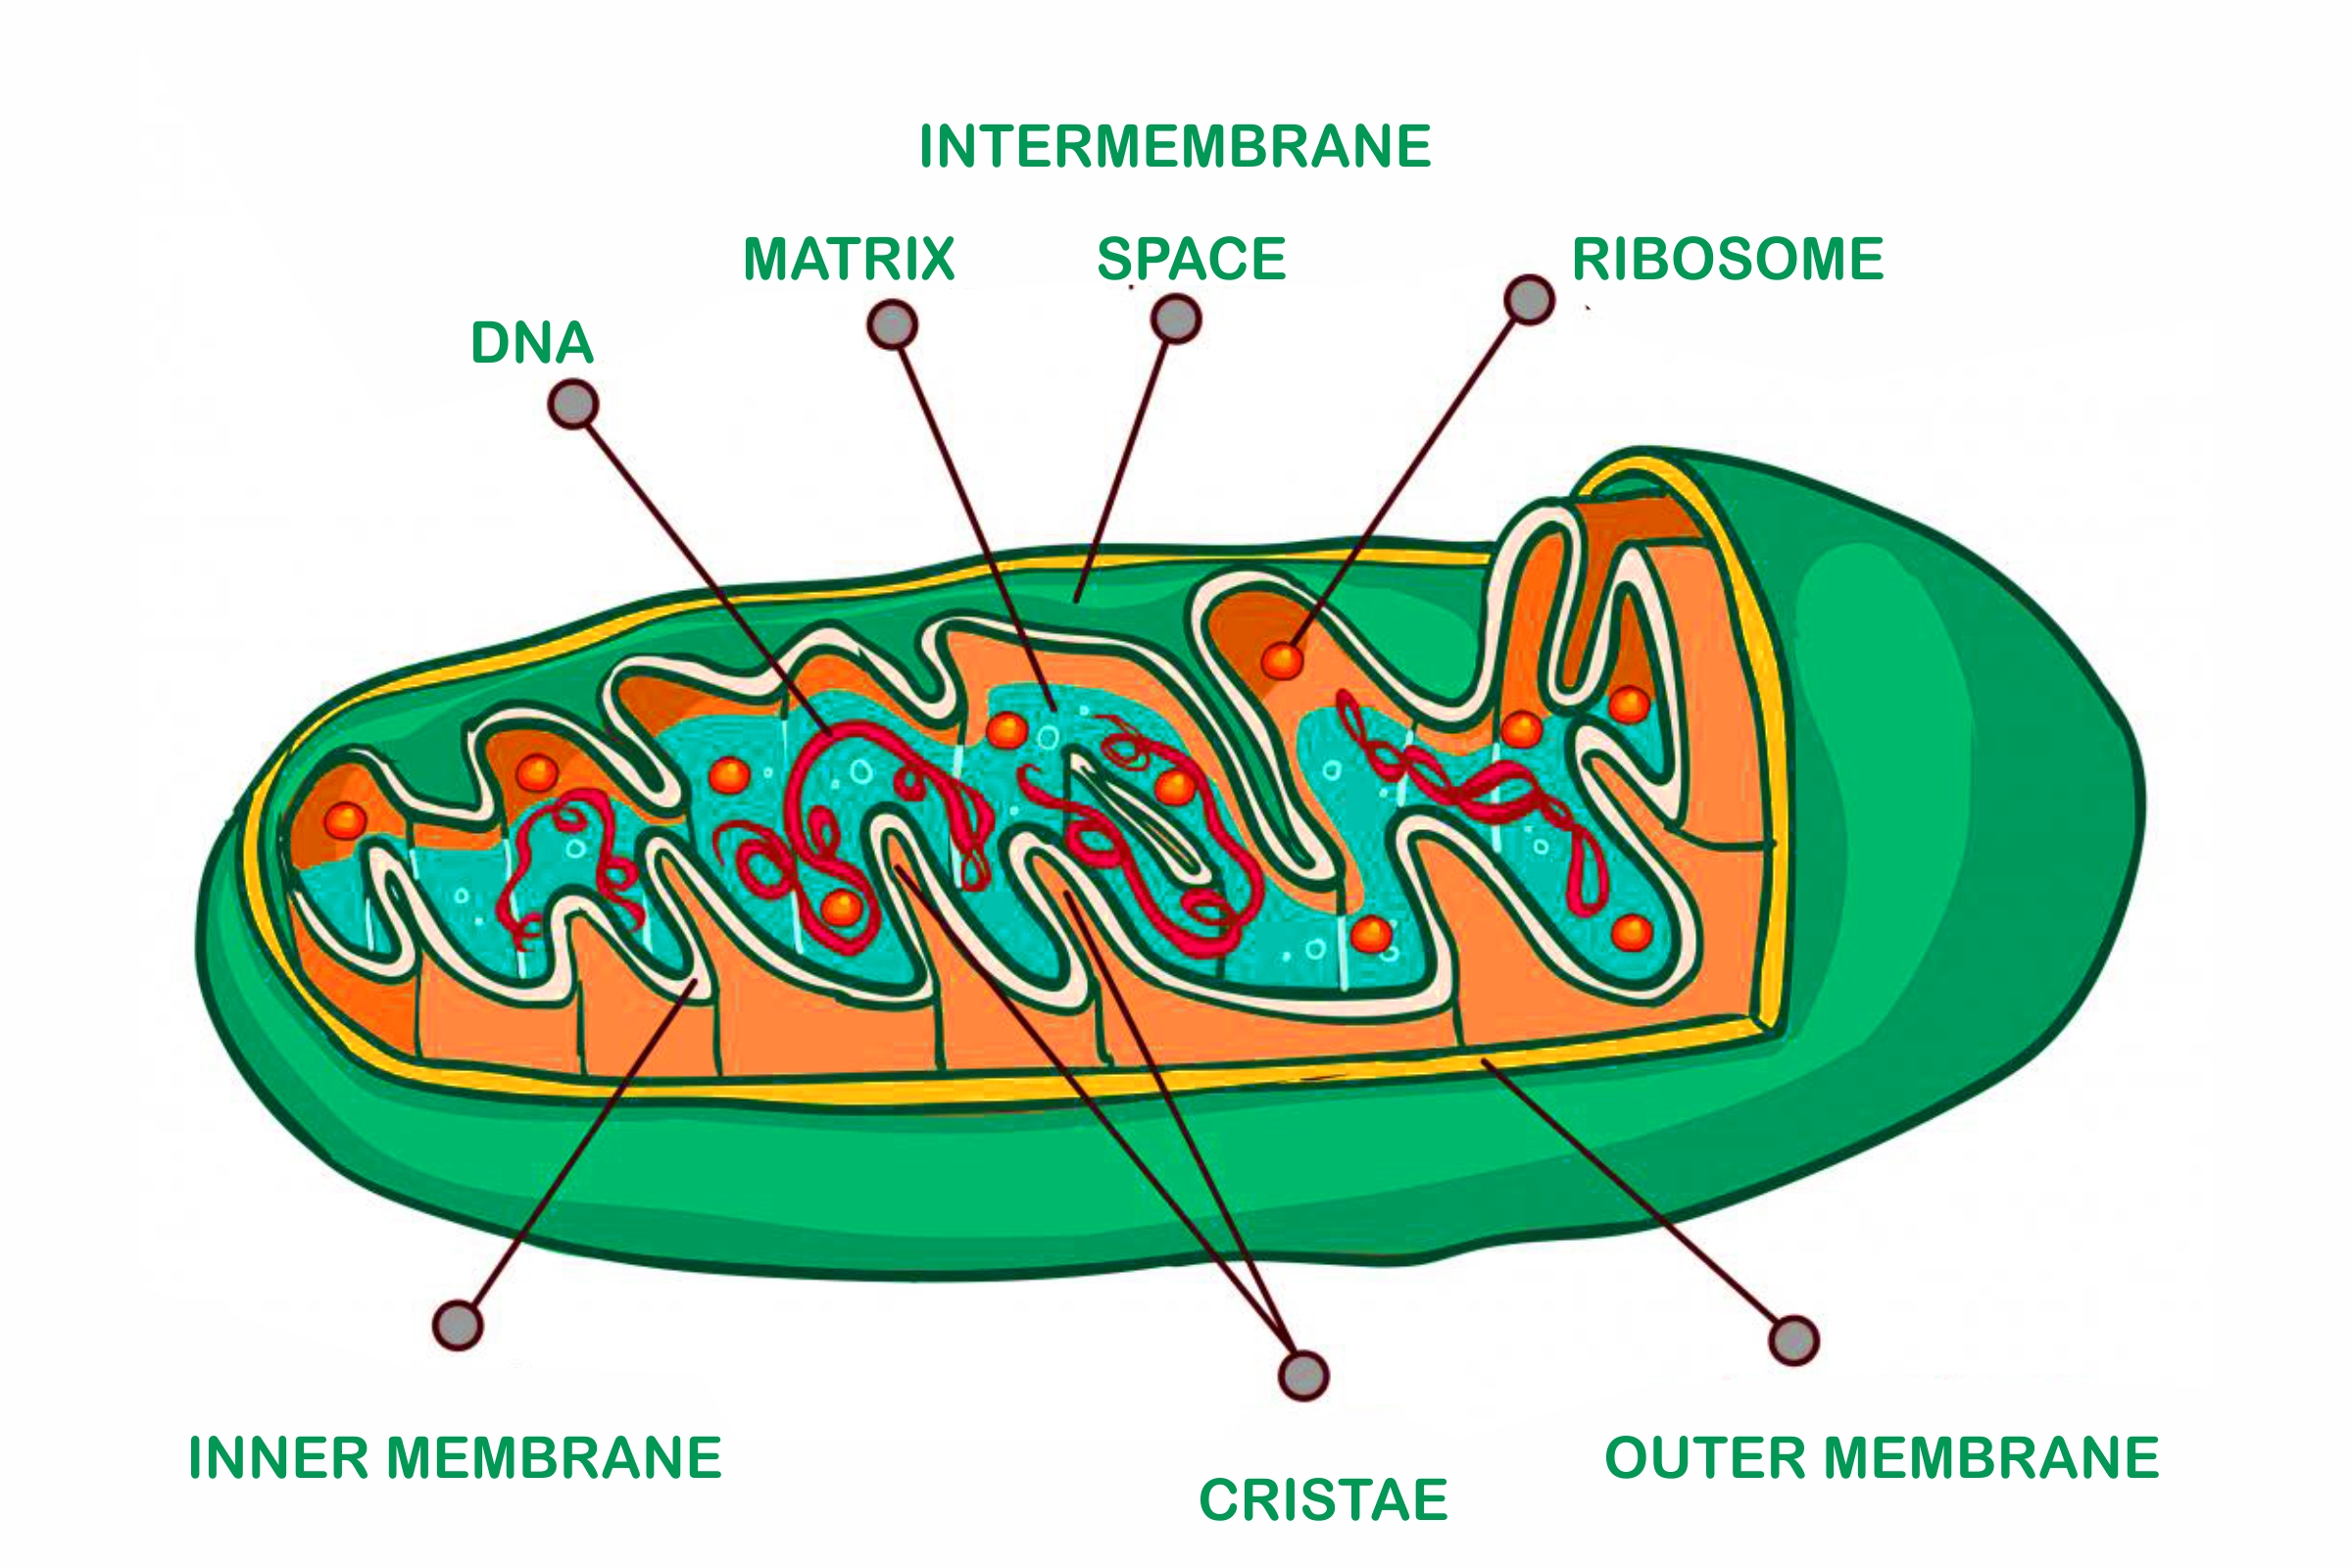 What is the most important function of mitochondria?